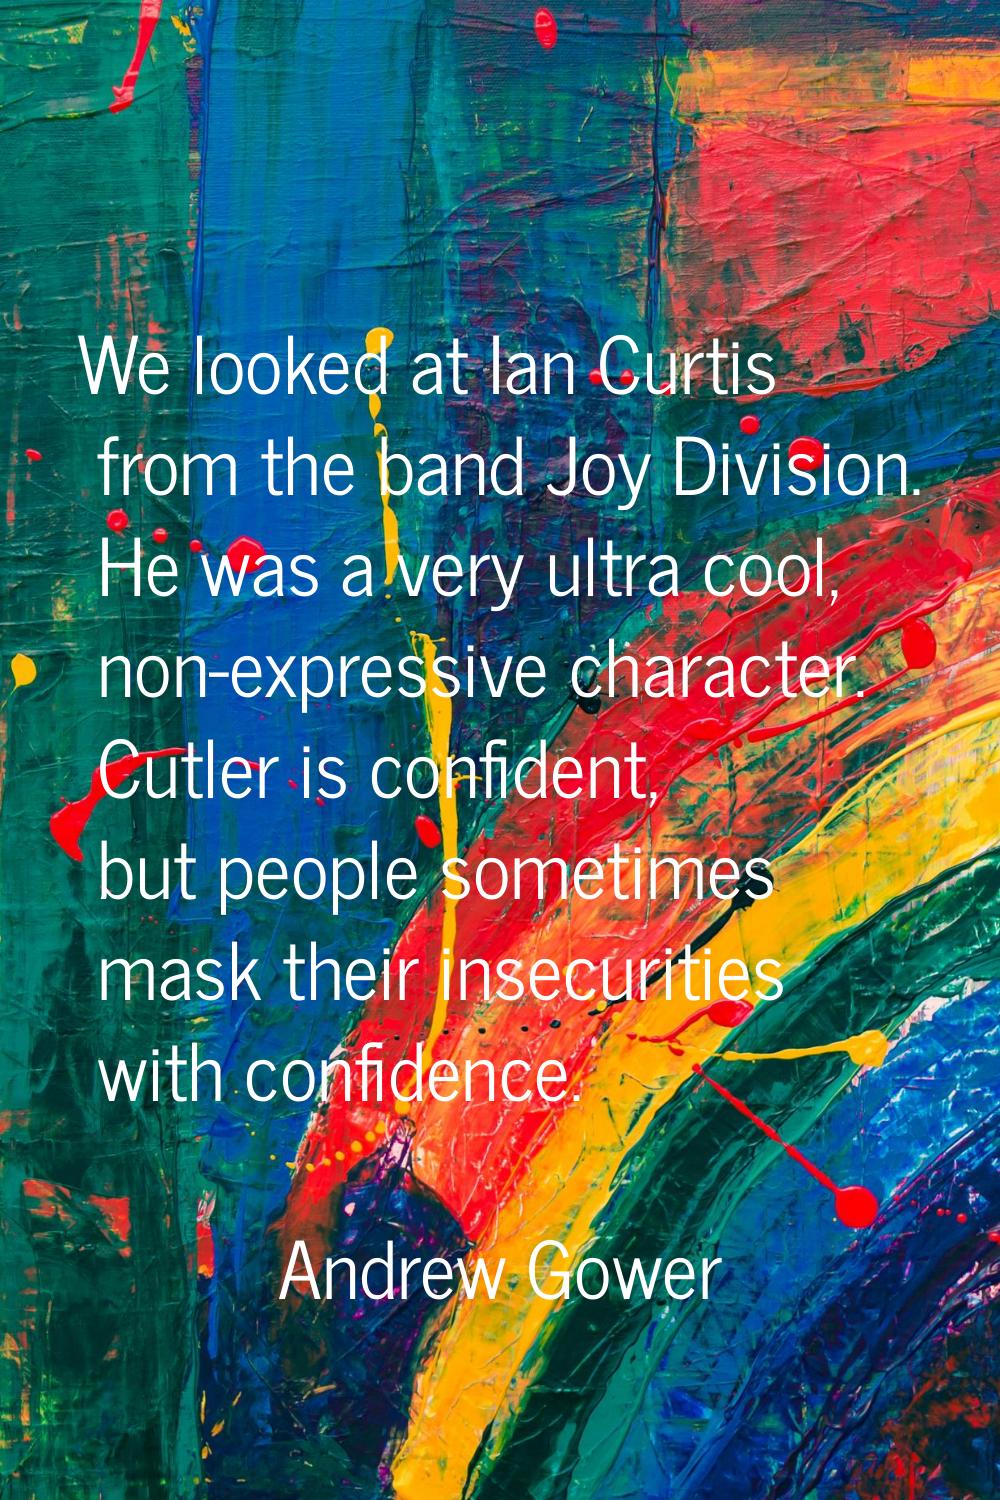 We looked at Ian Curtis from the band Joy Division. He was a very ultra cool, non-expressive charac